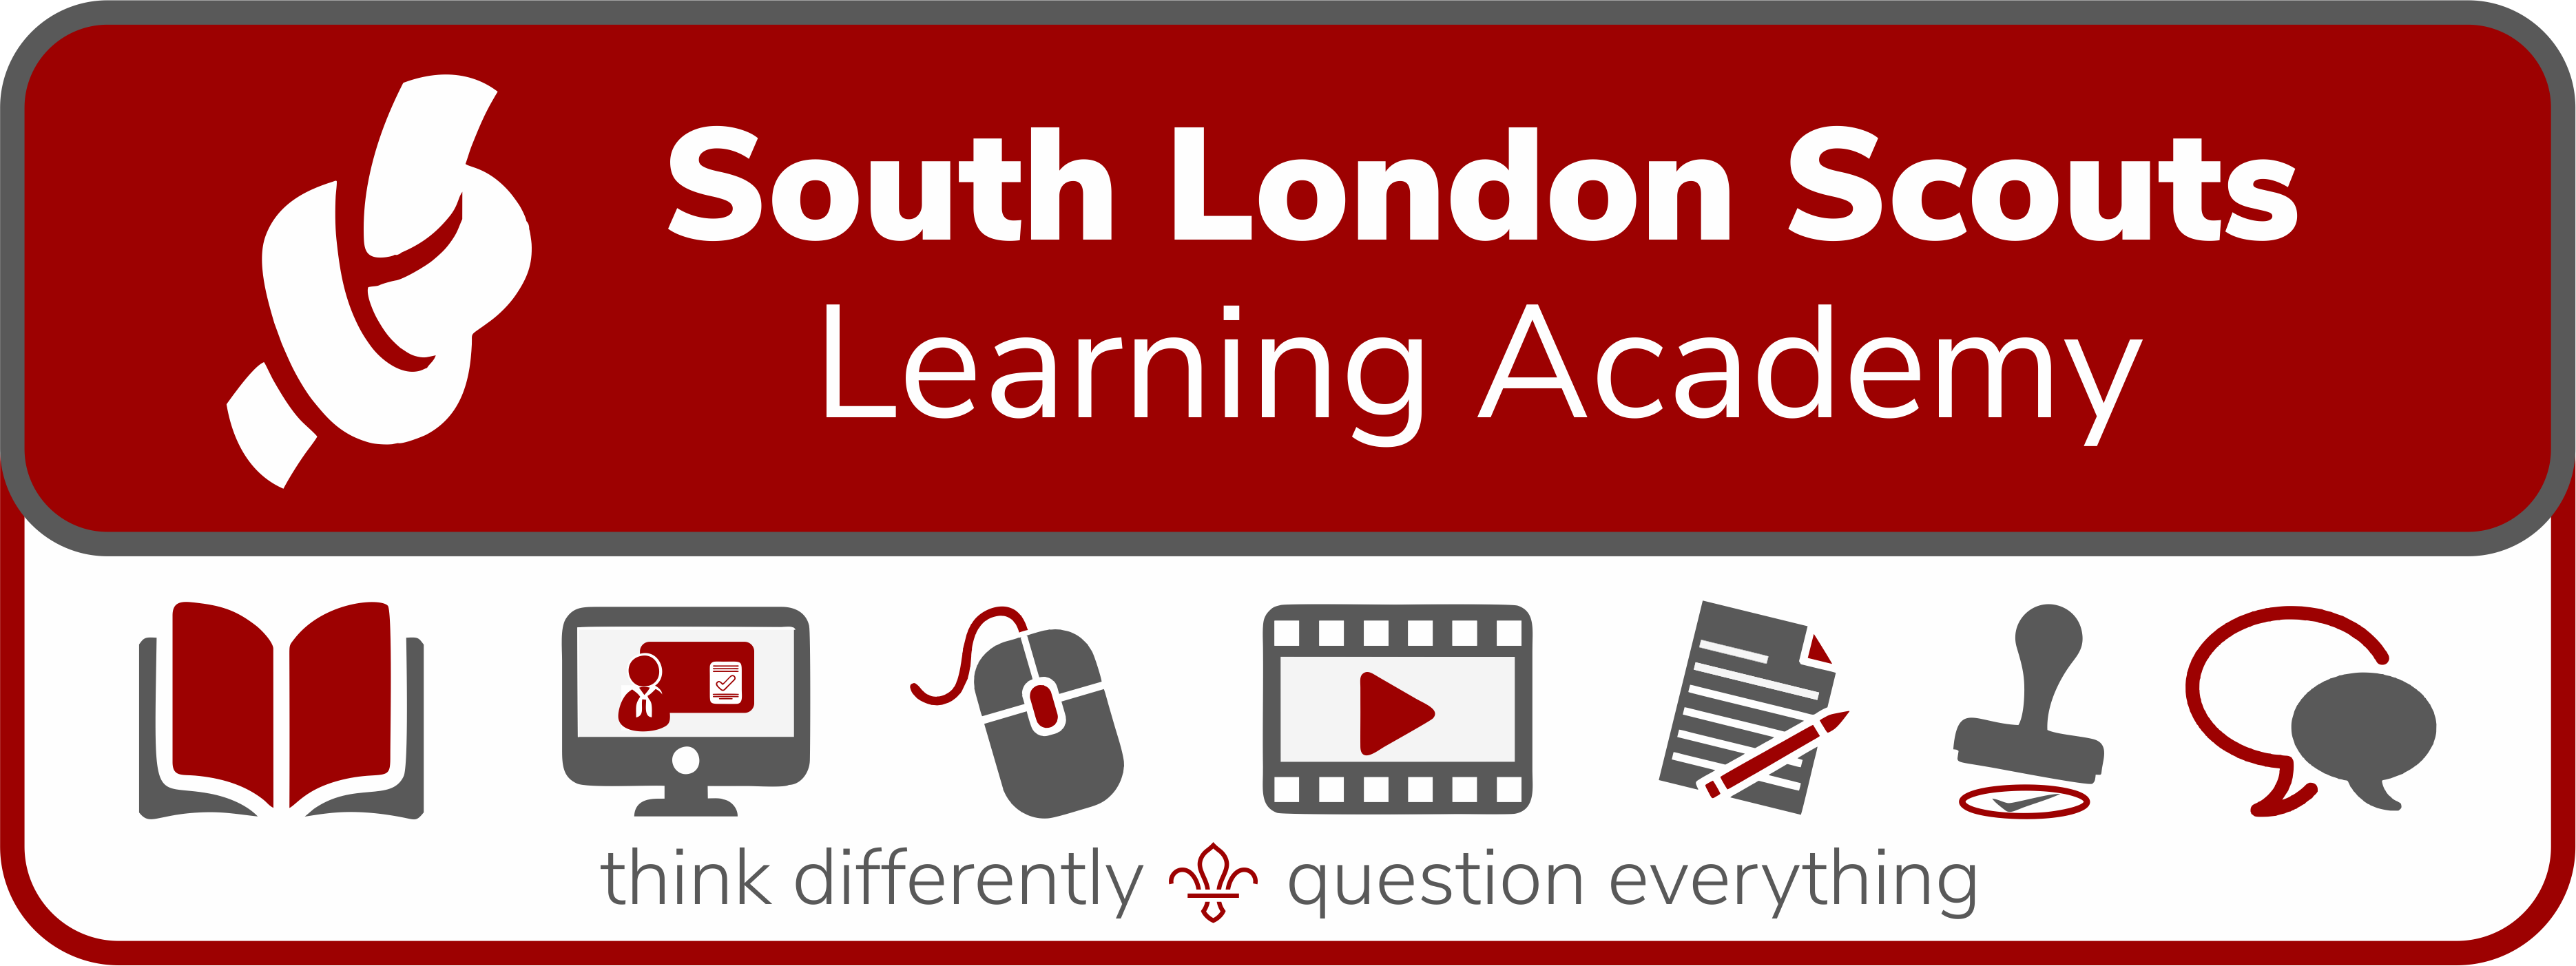 South London Scouts Learning Academy